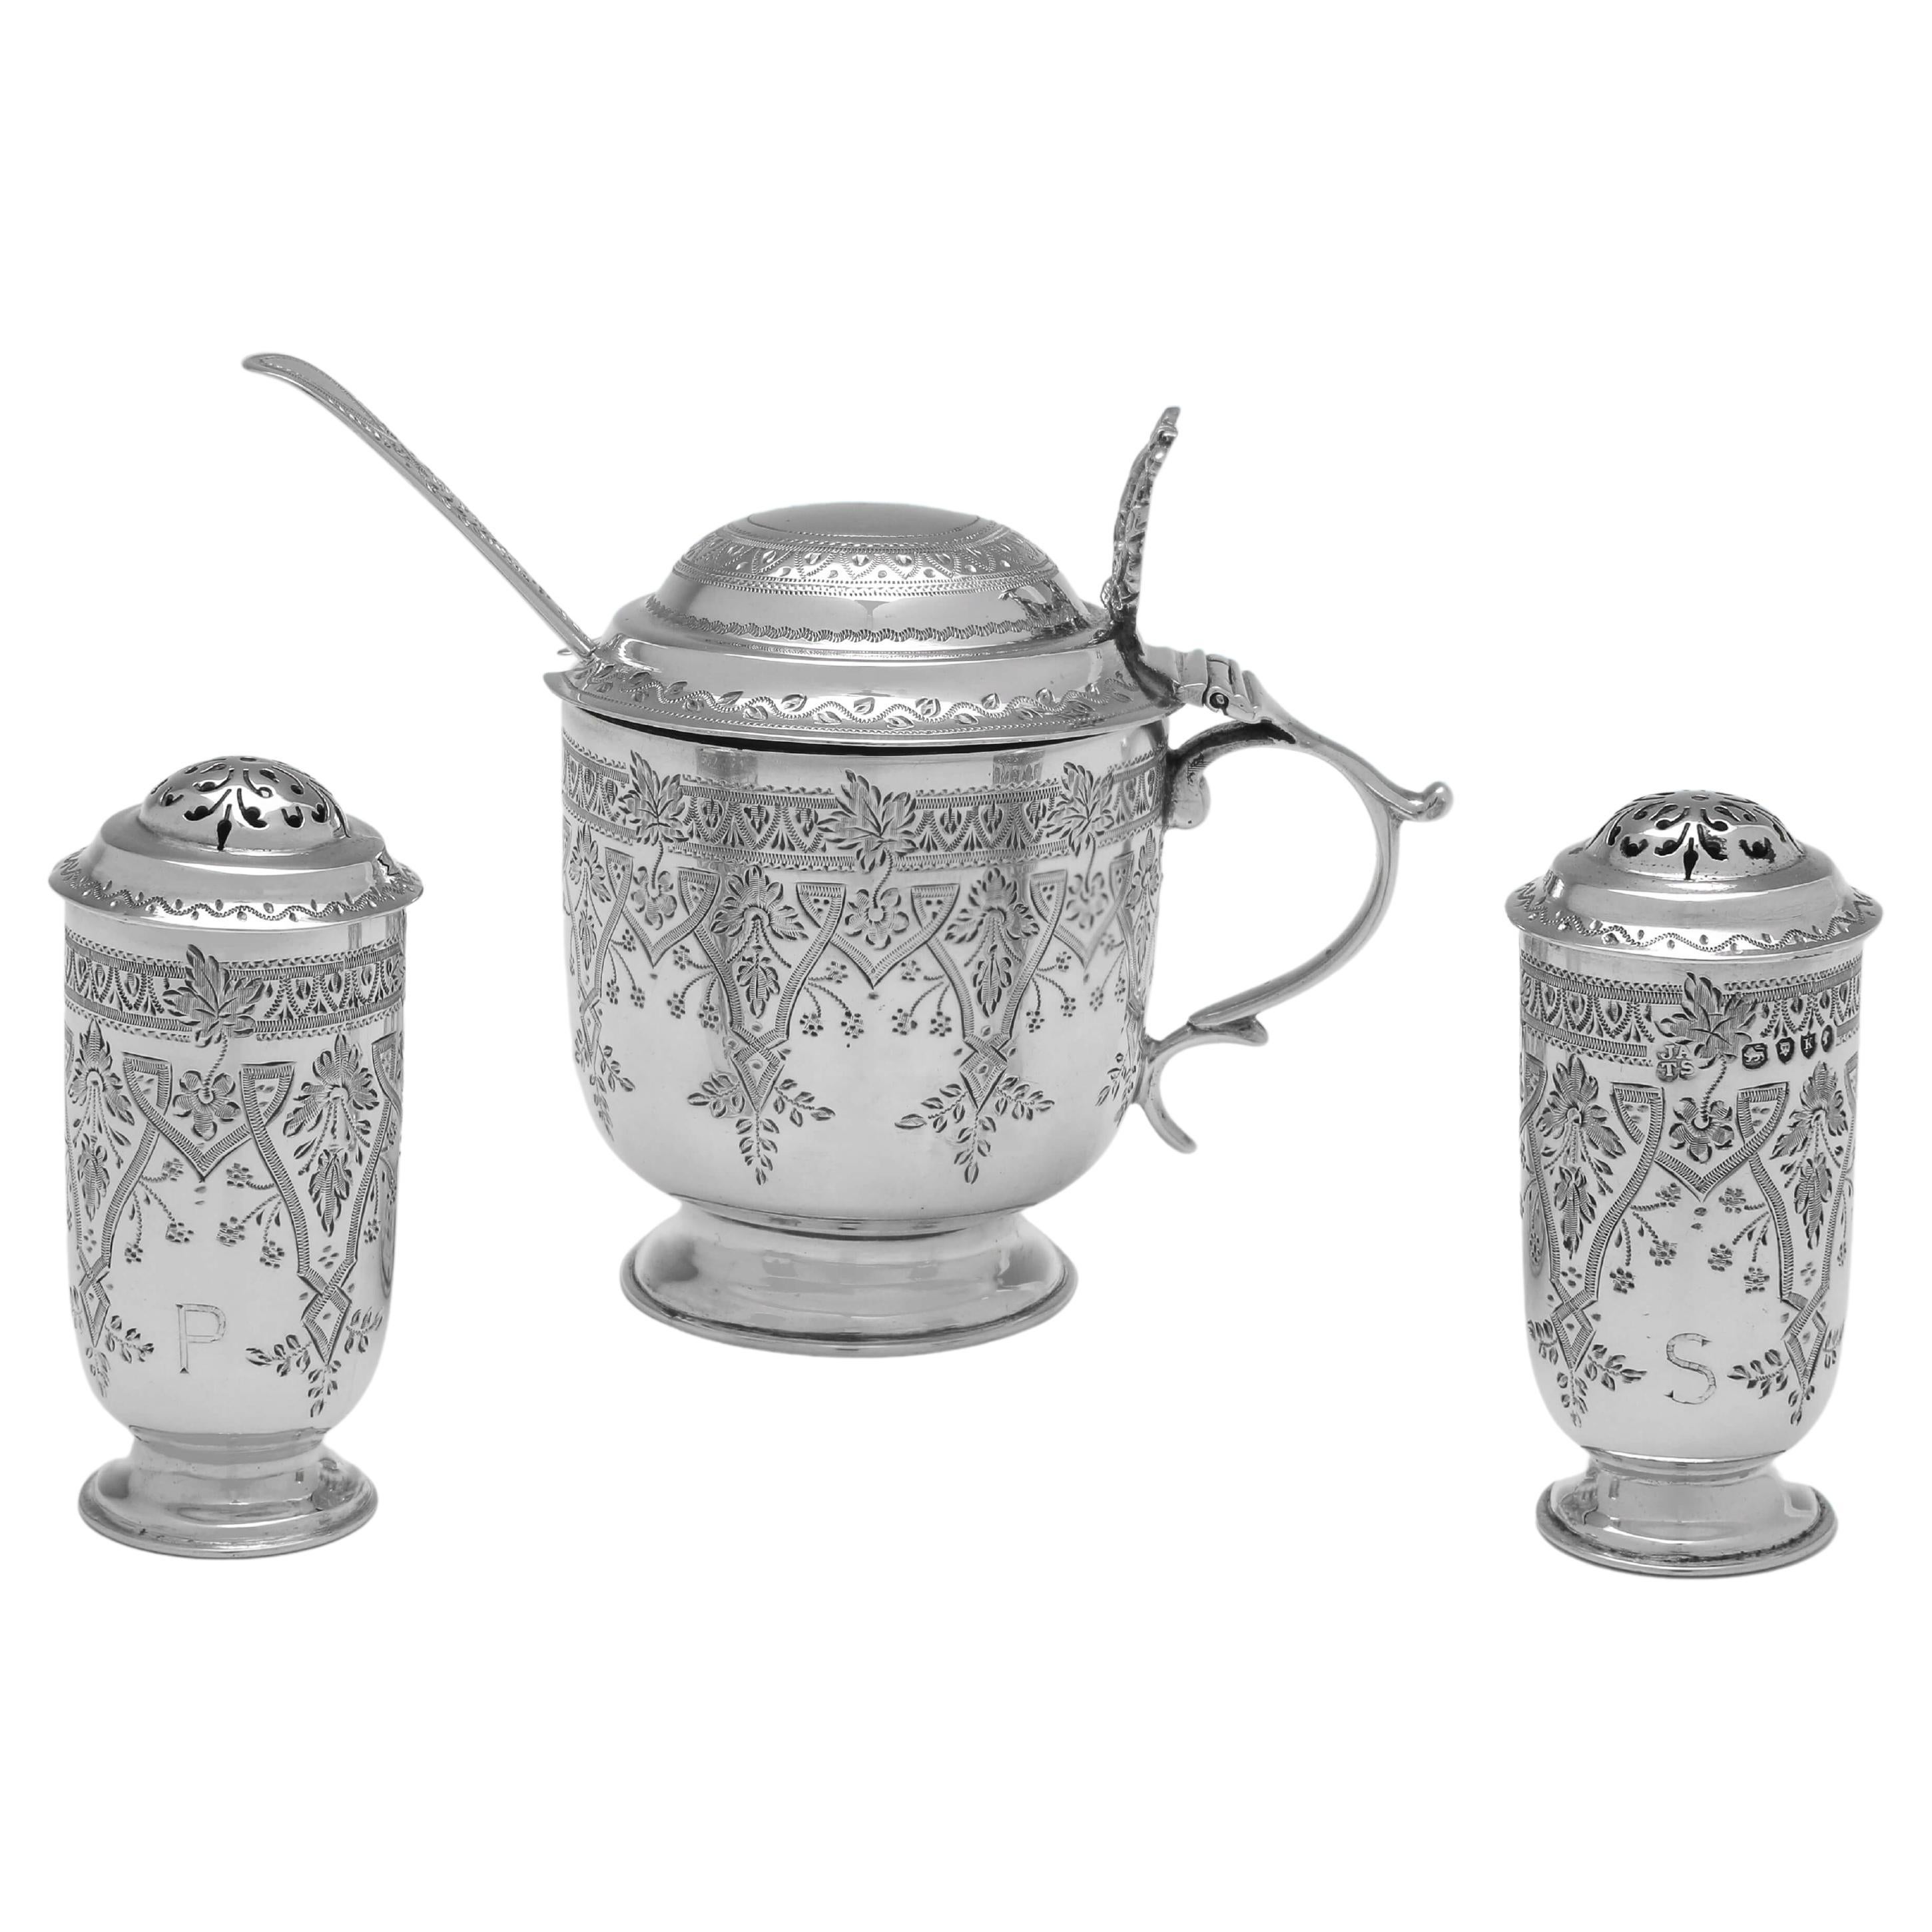 Hallmarked in London in 1885 by Aldwinckle & Slater, this very attractive, Antique Sterling Silver Condiment Set, comprises a mustard pot and spoon, a salt shaker and a pepper shaker (engraved S & P and gold plated inside the salt shaker), all